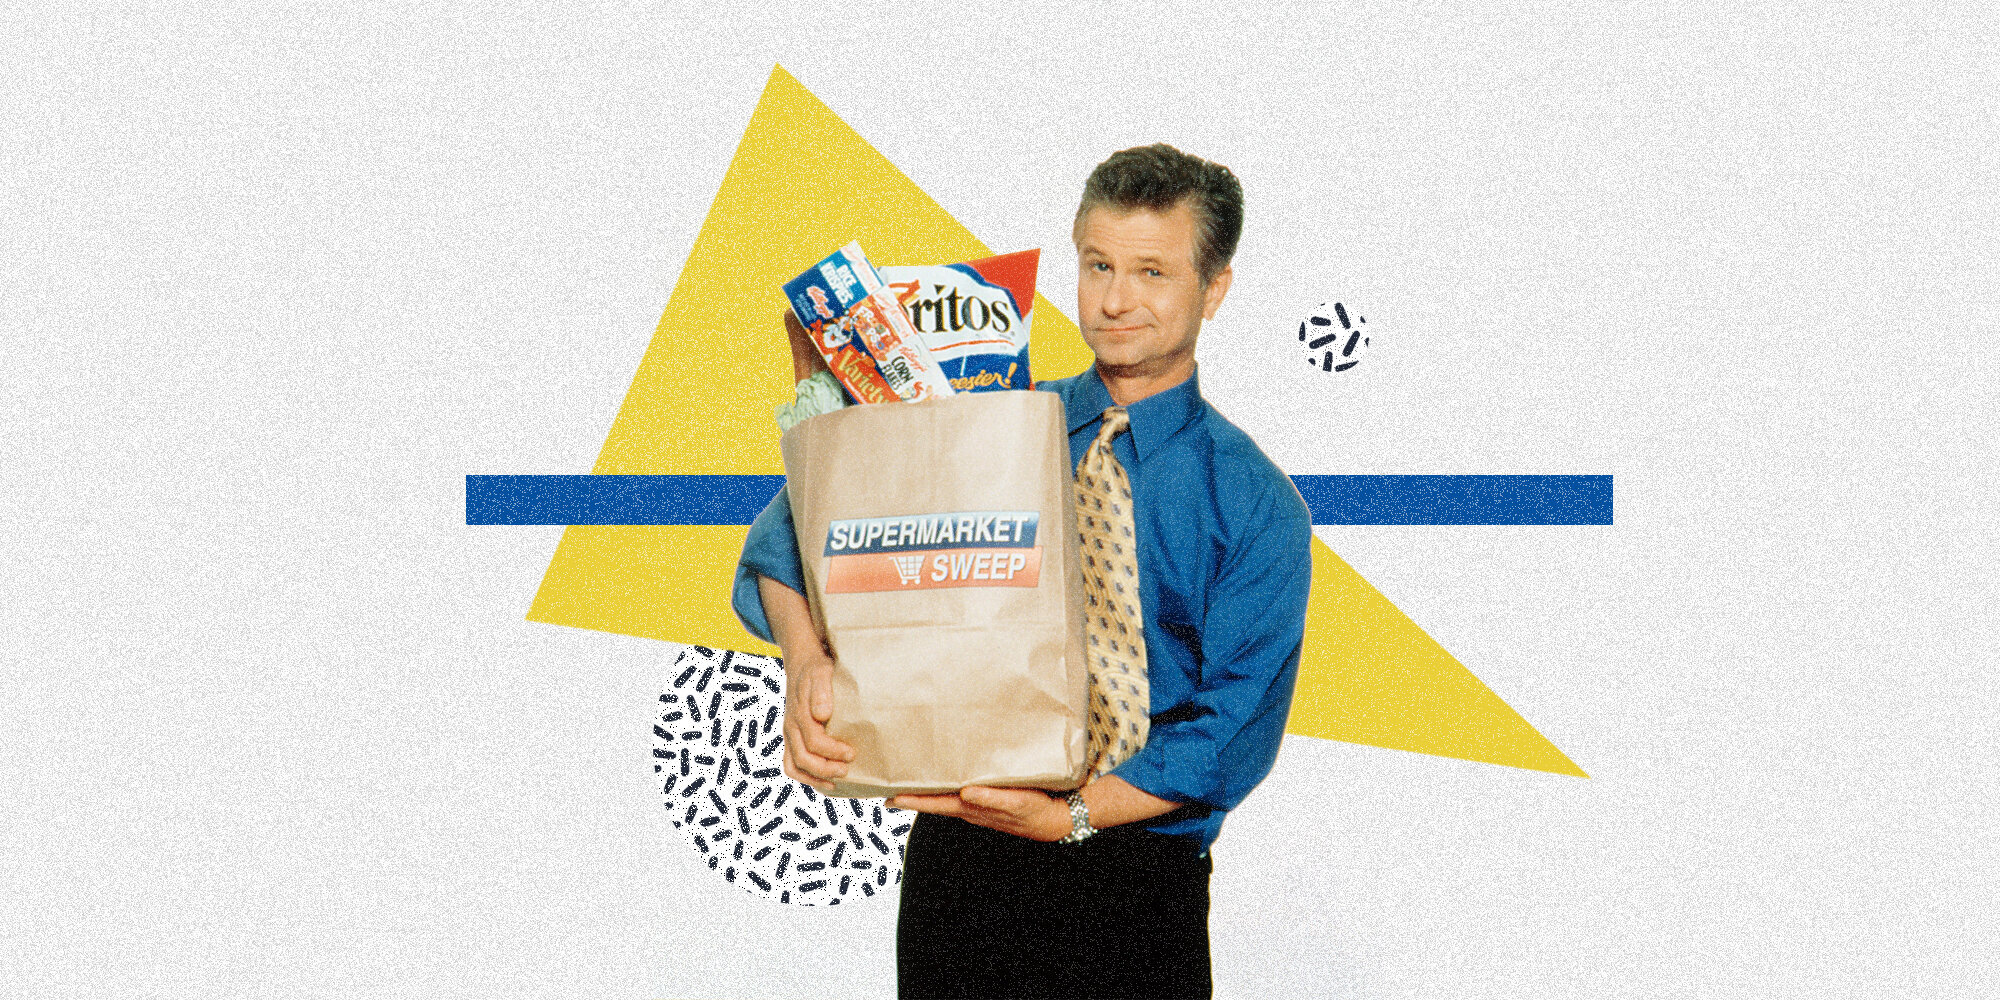 An Oral History Of Supermarket Sweep, A Game Show With A Surprising Shelf Life HuffPost Entertainment image